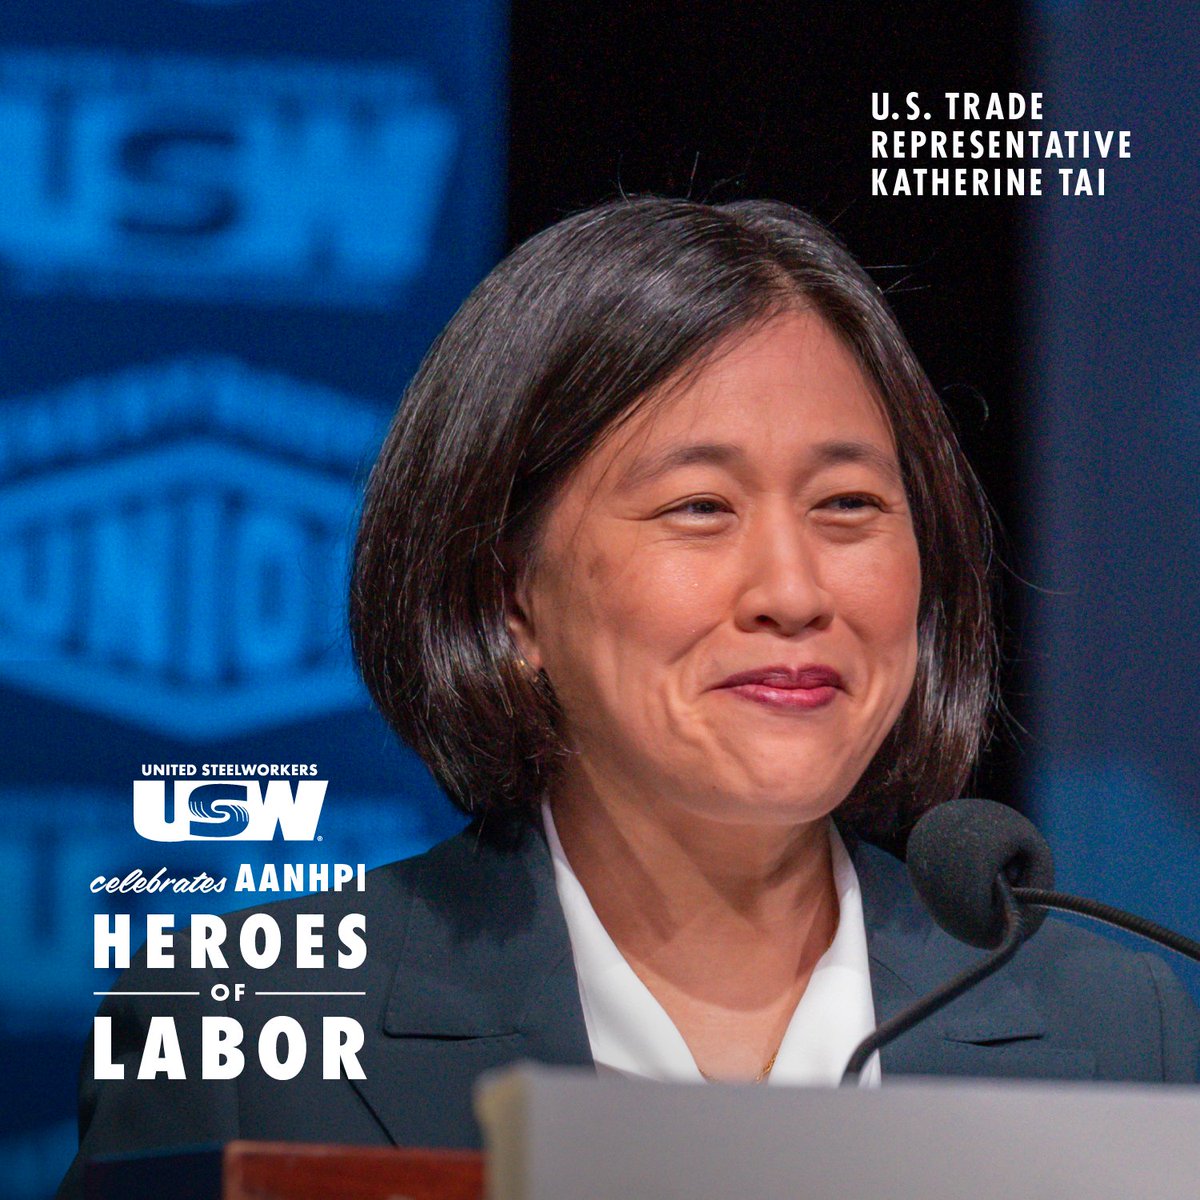 The USW continues to mark #AANHPI Heritage Month today by celebrating the work of U.S. Trade Representative Katherine Tai. The first Asian American to serve as USTR, Tai has consistently advocated for worker-centered trade policies. #1u